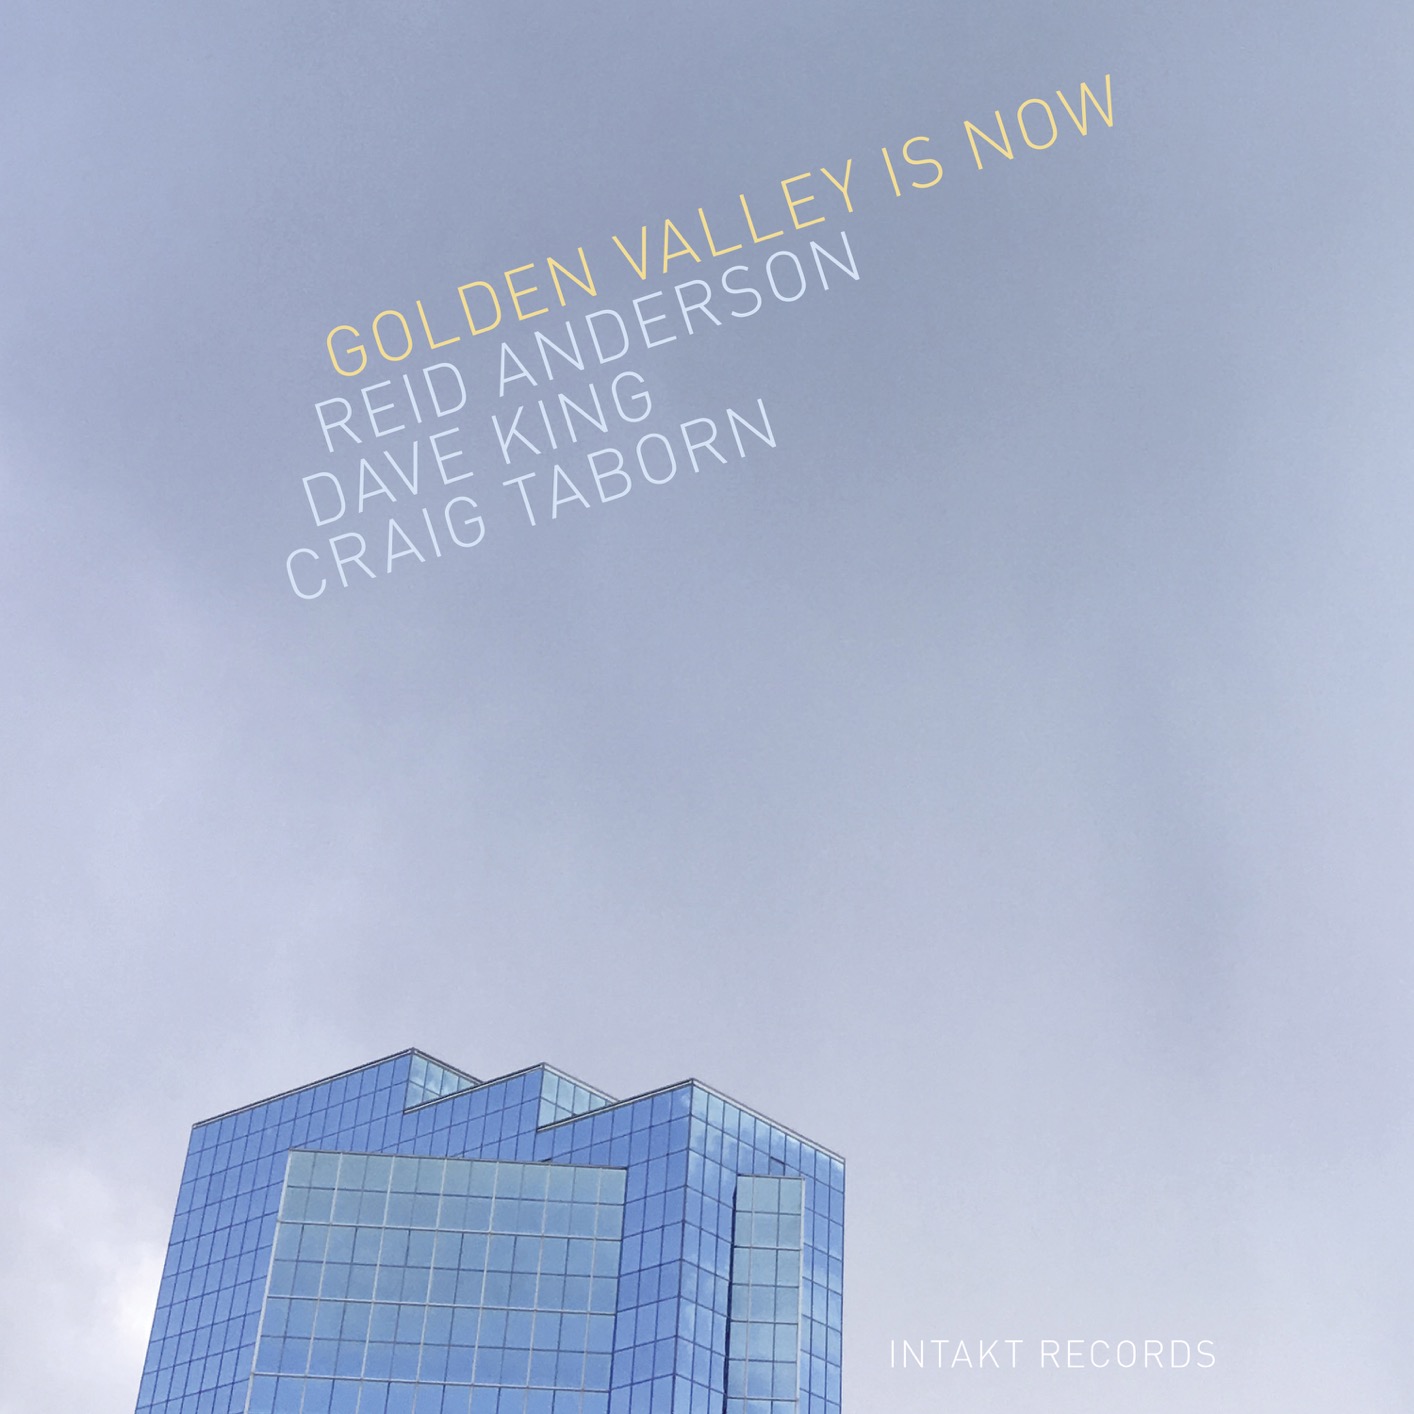 Reid Anderson, Dave King & Craig Taborn - Golden Valley Is Now (2019) [FLAC 24bit/48kHz]